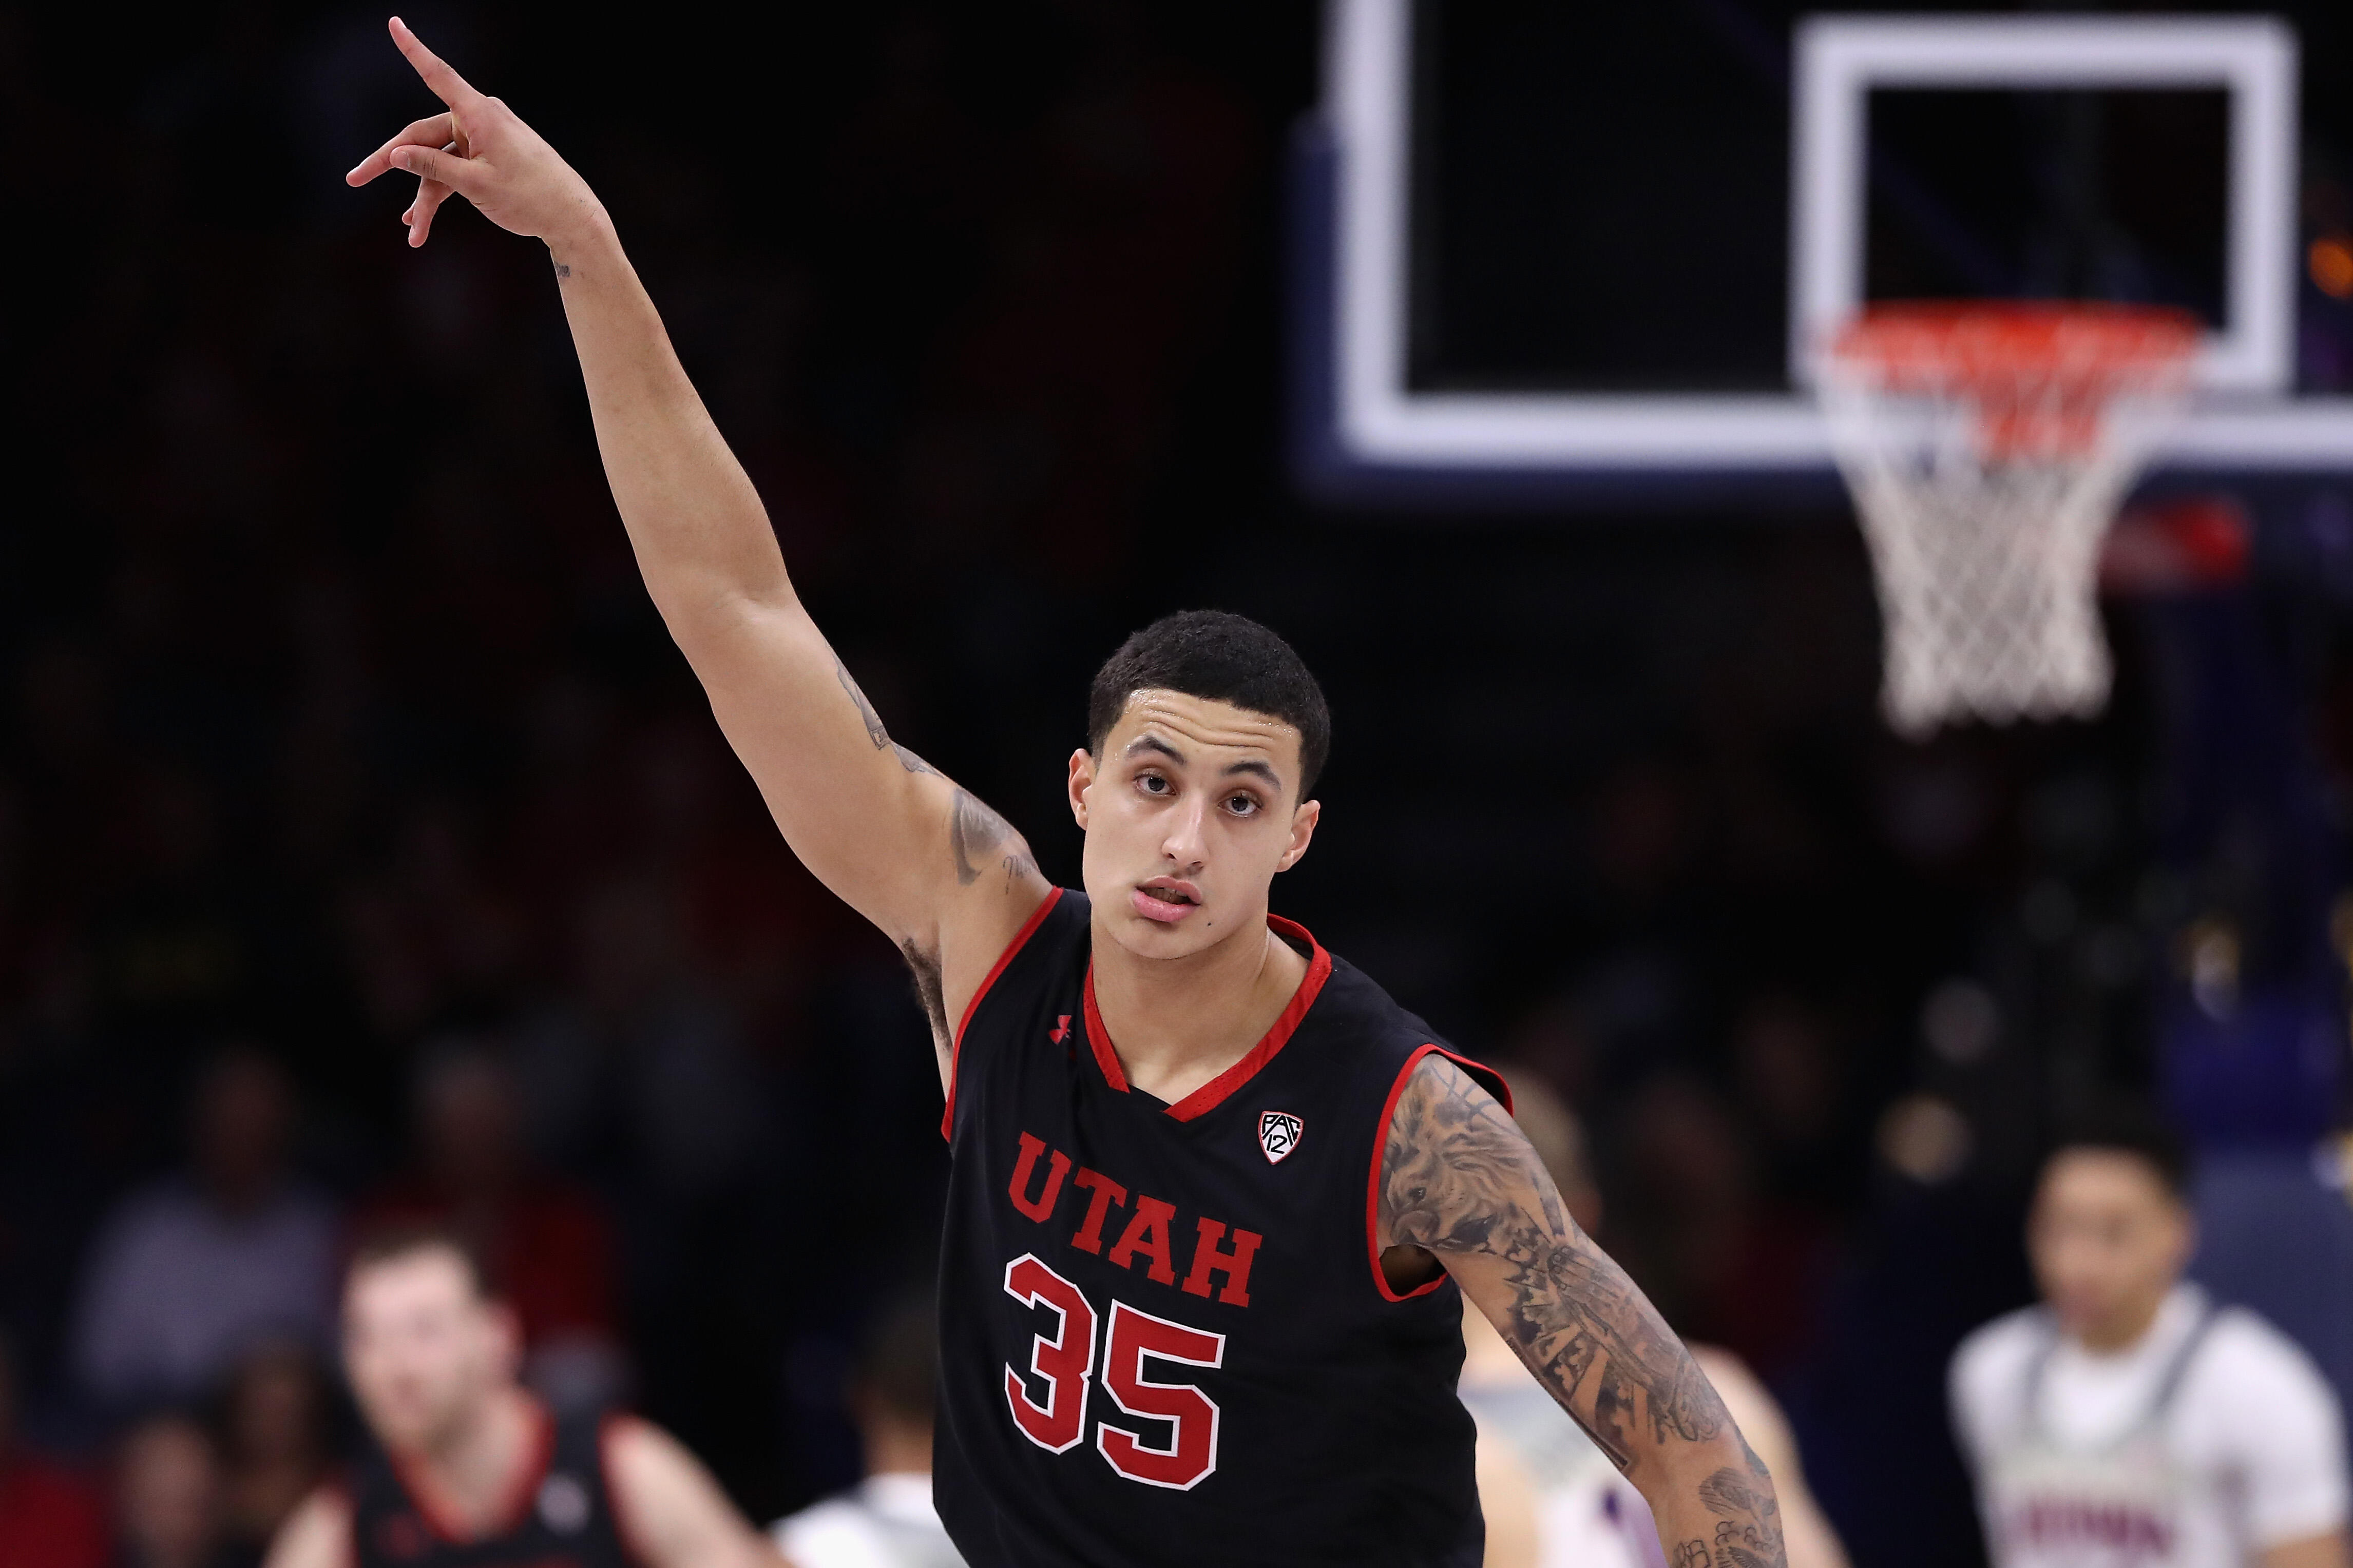 TUCSON, AZ - JANUARY 05:  Kyle Kuzma #35 of the Utah Utes reacts to a three point shot against the Arizona Wildcats during the first half of the college basketball game at McKale Center on January 5, 2017 in Tucson, Arizona.  (Photo by Christian Petersen/